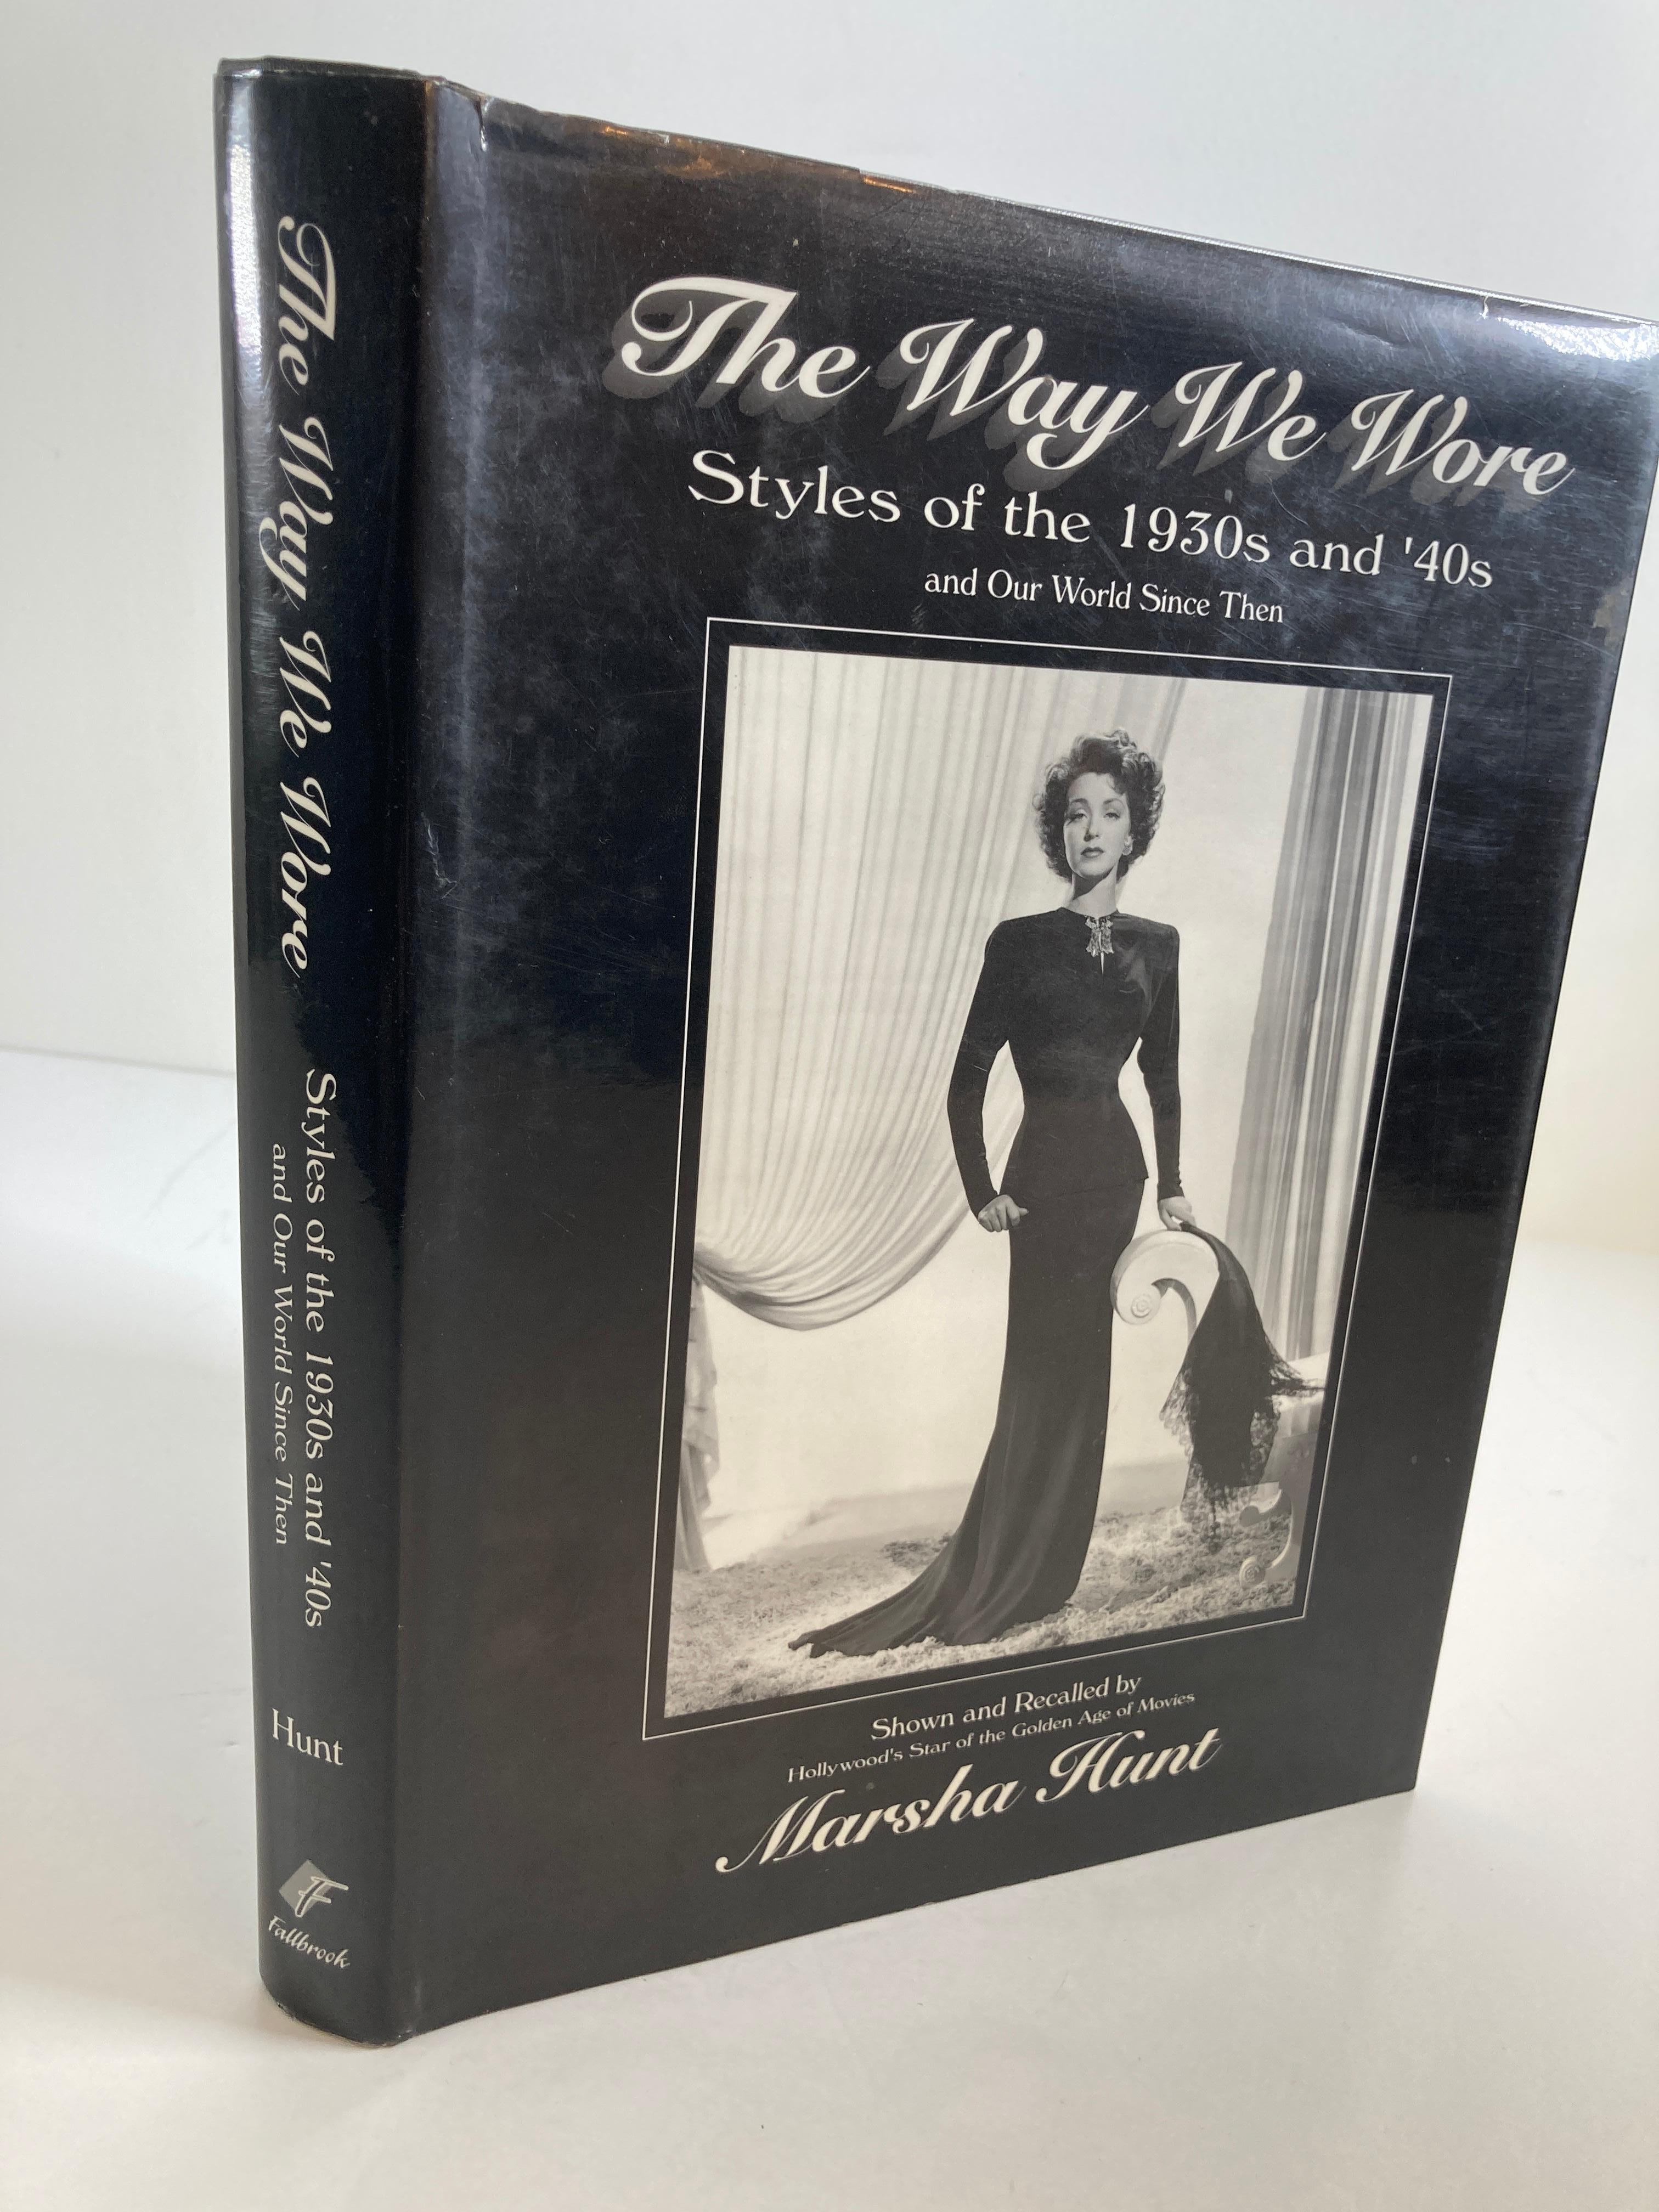 “The Way We Wore: Styles of the 1930s and '40s and Our World Since Then”
Book by Marsha Hunt.
Marsha Hunt, once voted the best dressed actress at MGM, presents pictures of herself along with leading men like John Wayne, Bob Cummings, Gene Kelly,